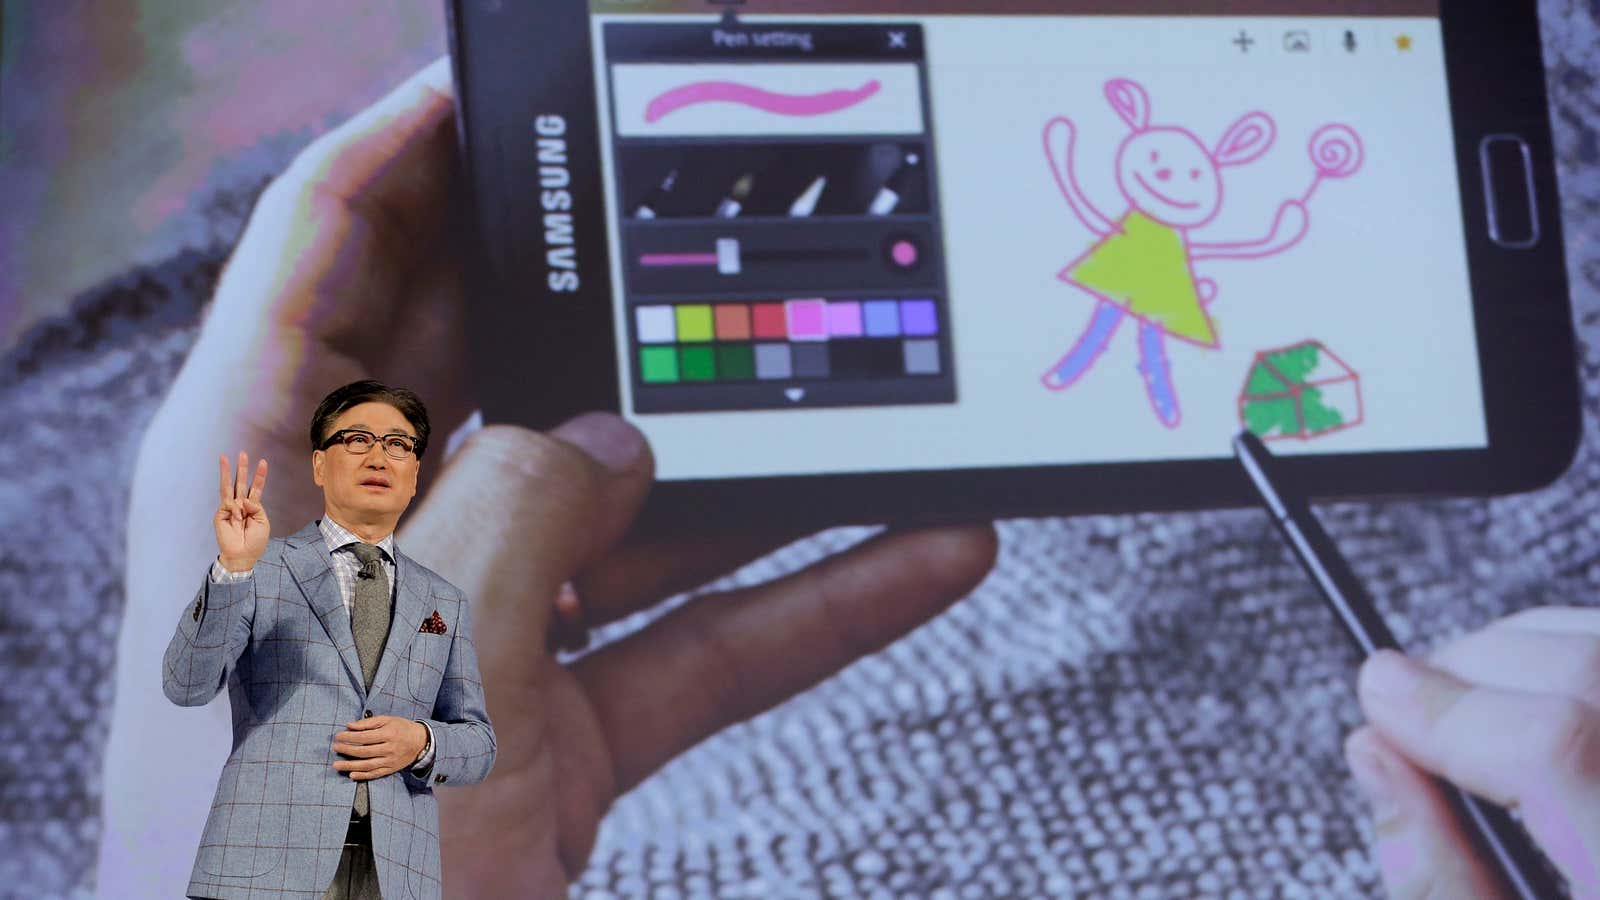 B.K. Yoon, head of consumer electronics at Samsung, calmly presenting his plans for world domination